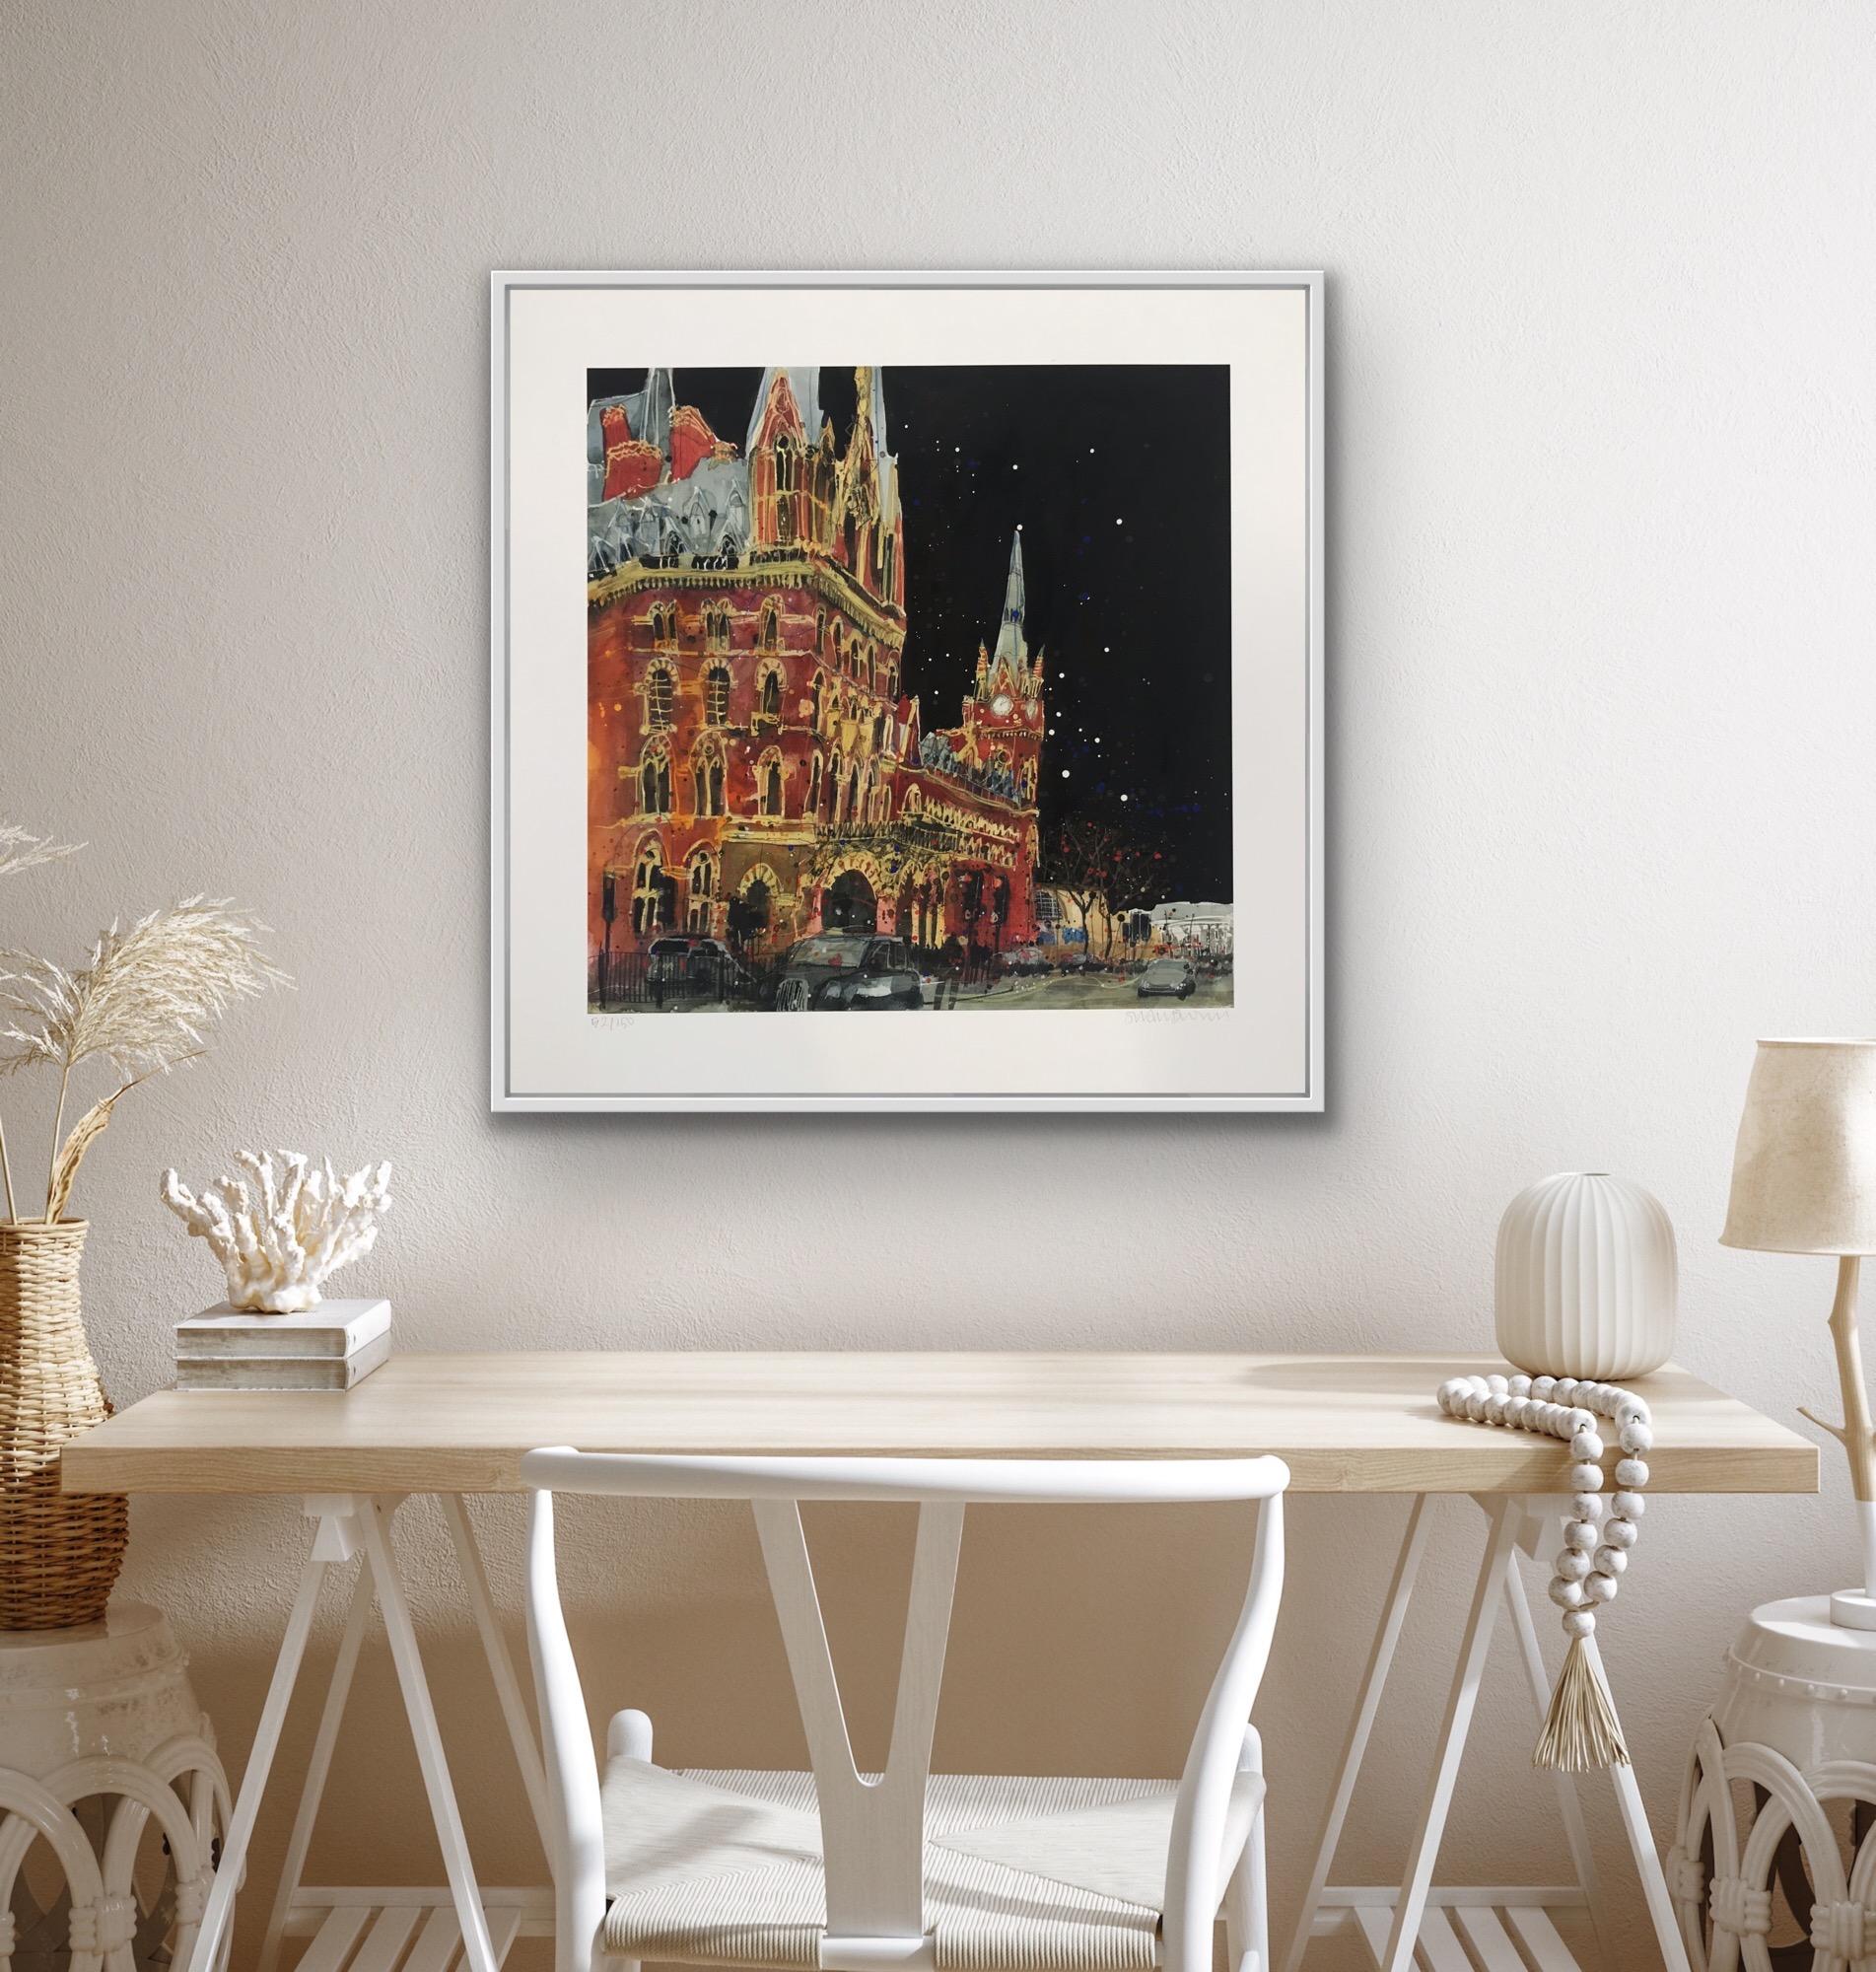 Cities 7 - Gothic Revival, St Pancras, London by Susan Brown. Limited edition giclée print - The print edition is 150 The image size of the print is 40cm X 40cm, the overall size is 50cm X 50cm Each print is signed and numbered by Susan Brown